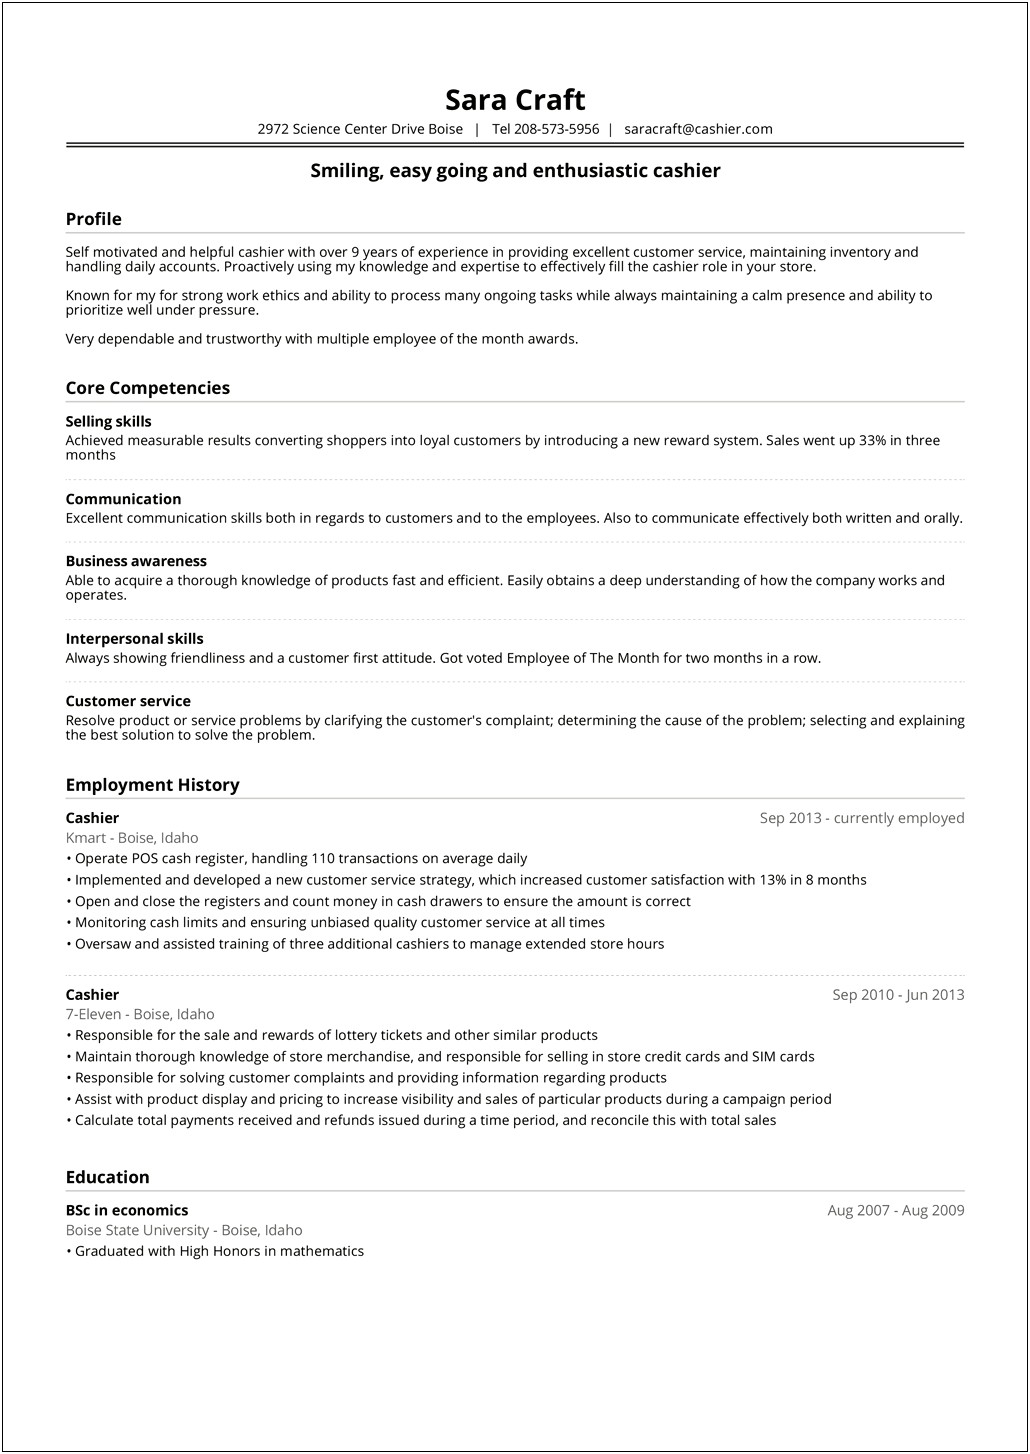 Cannot Download Resume Template Office 2007